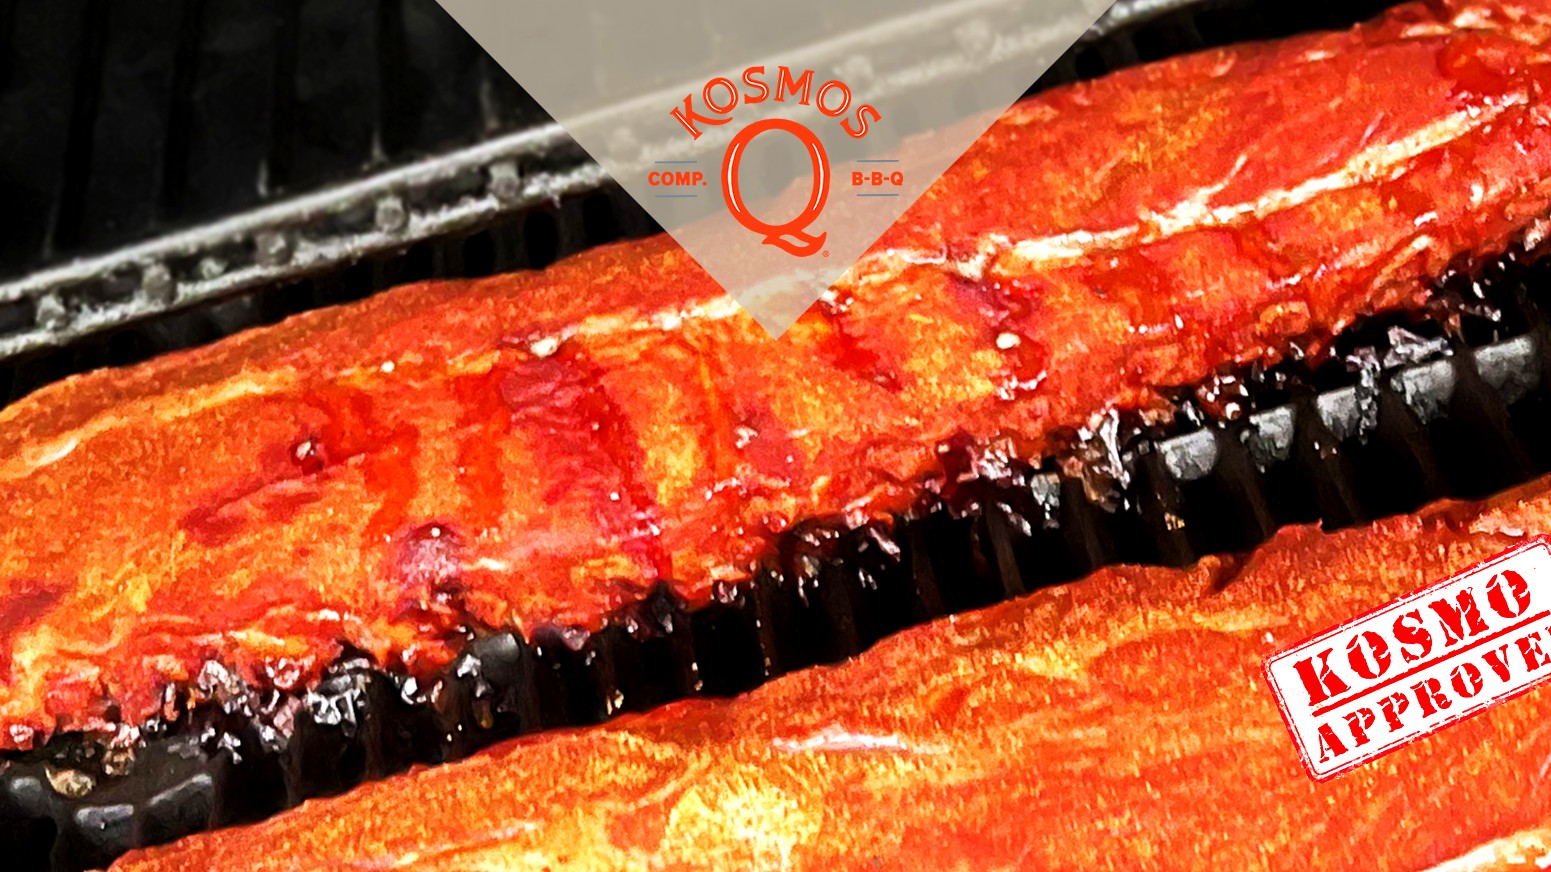 Image of Sweet & Spicy Ribs Recipe